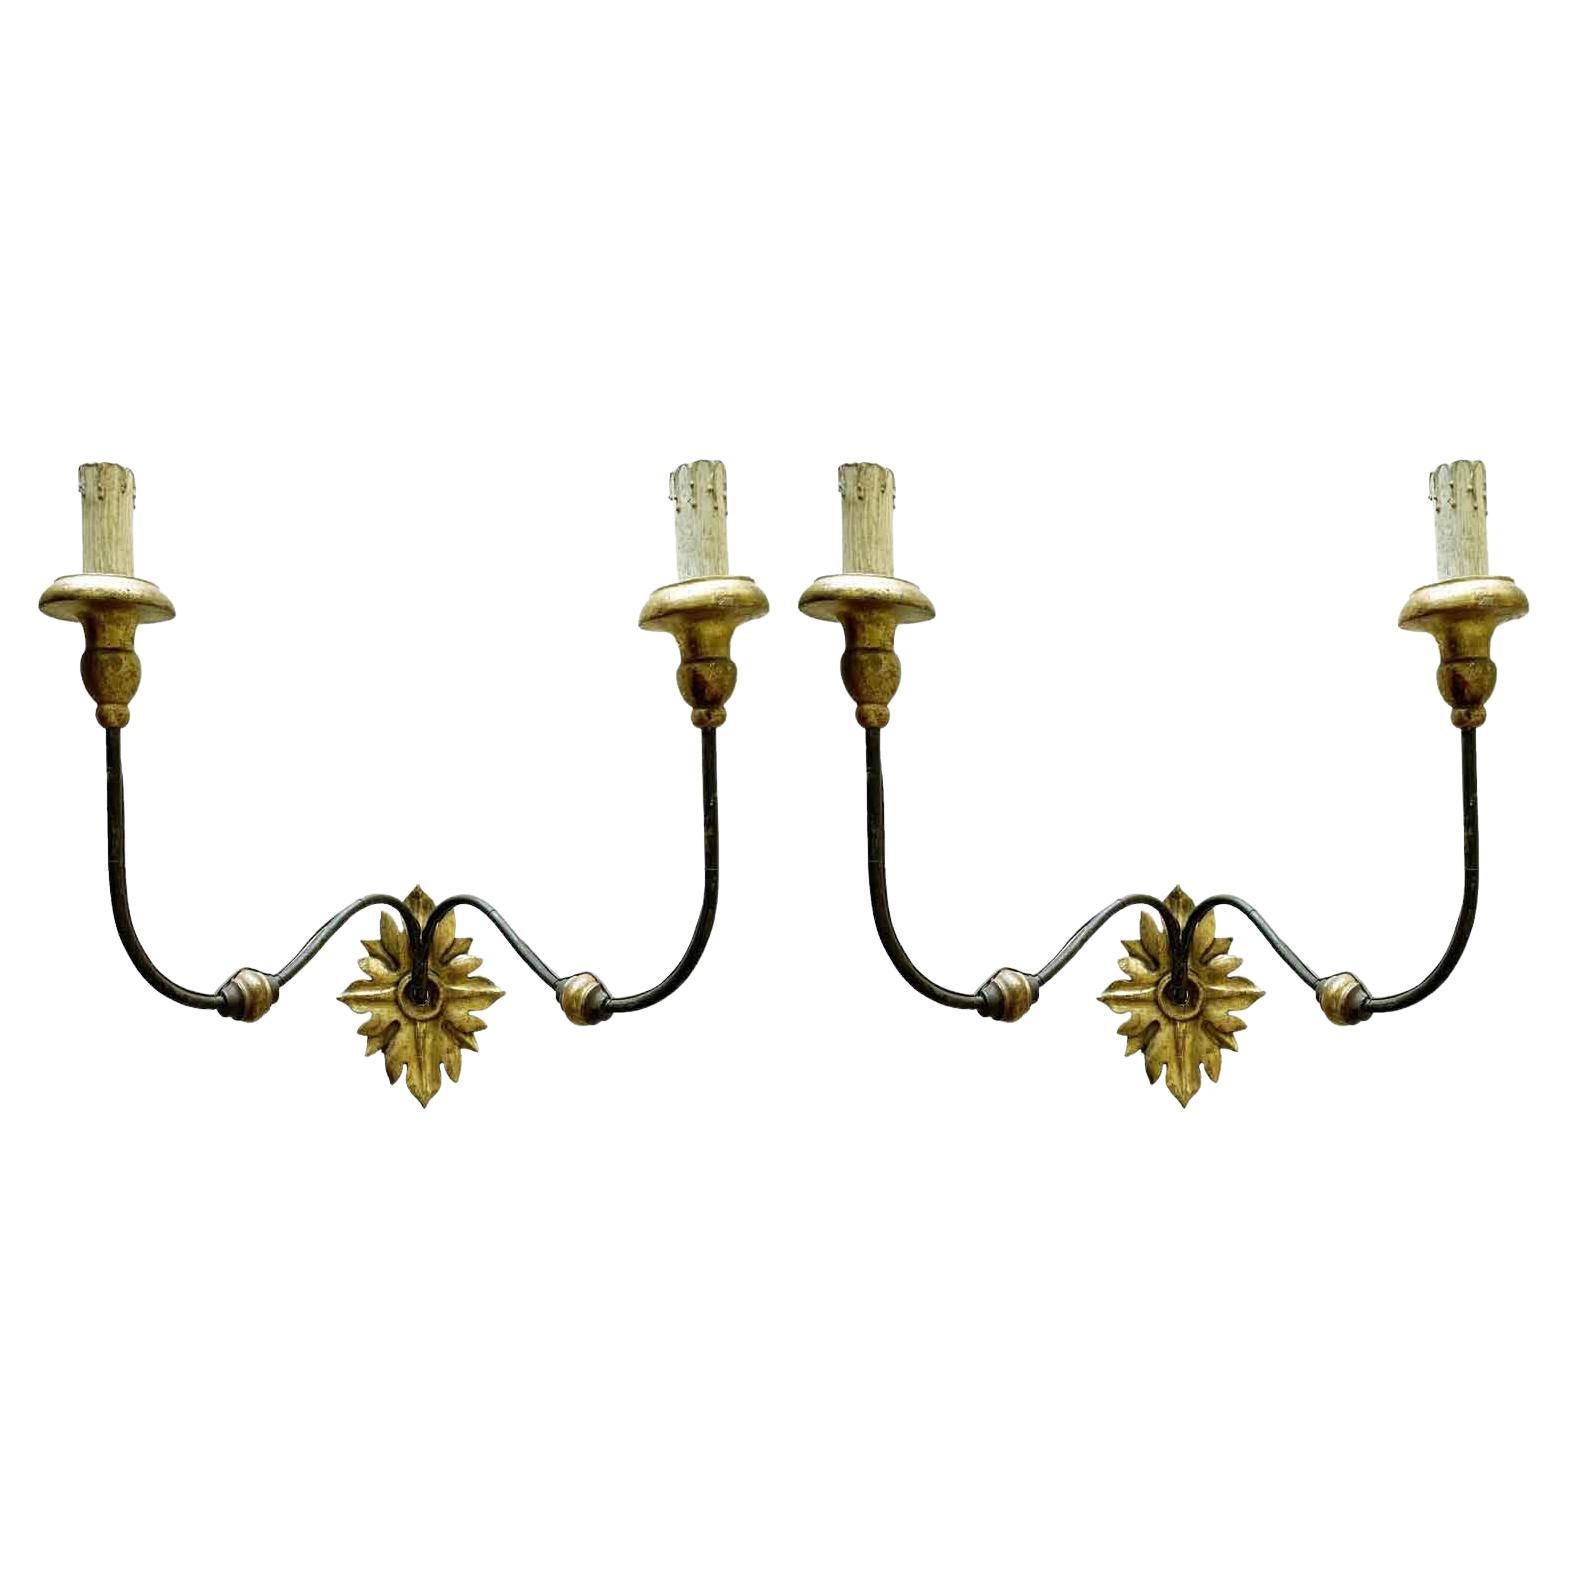 18th Century Pair of Large Two-Arm Italian Iron Sconces From Tuscany